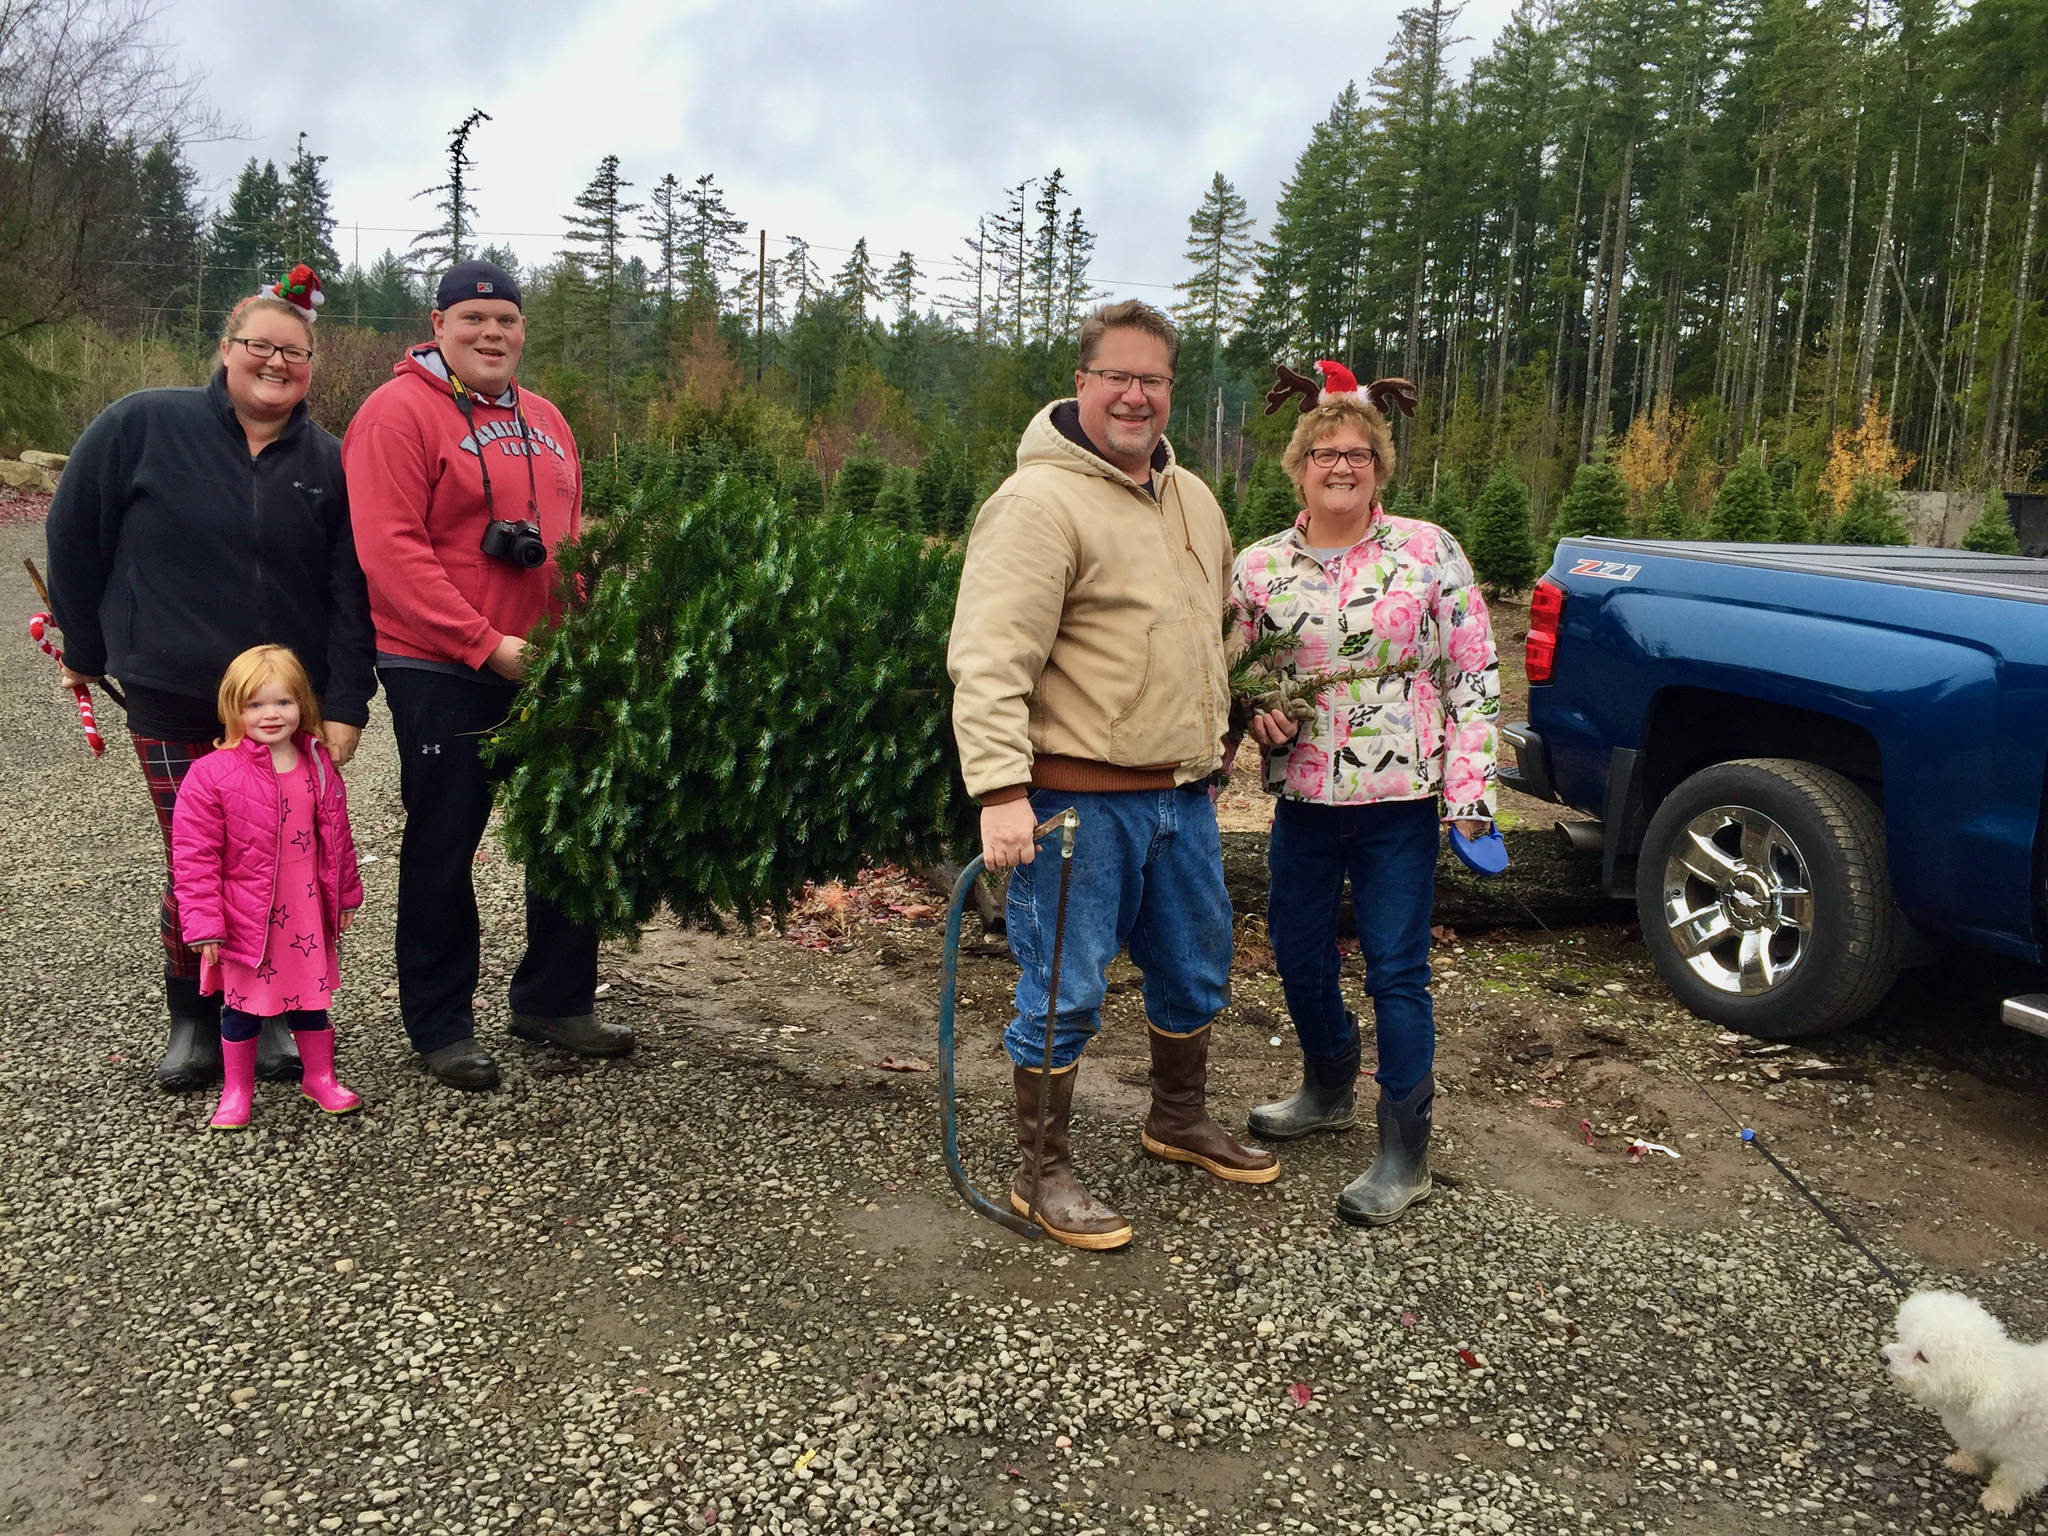 From 2019, a family successfully cuts down its own tree at the farm. Courtesy Olmstead Tree Farms